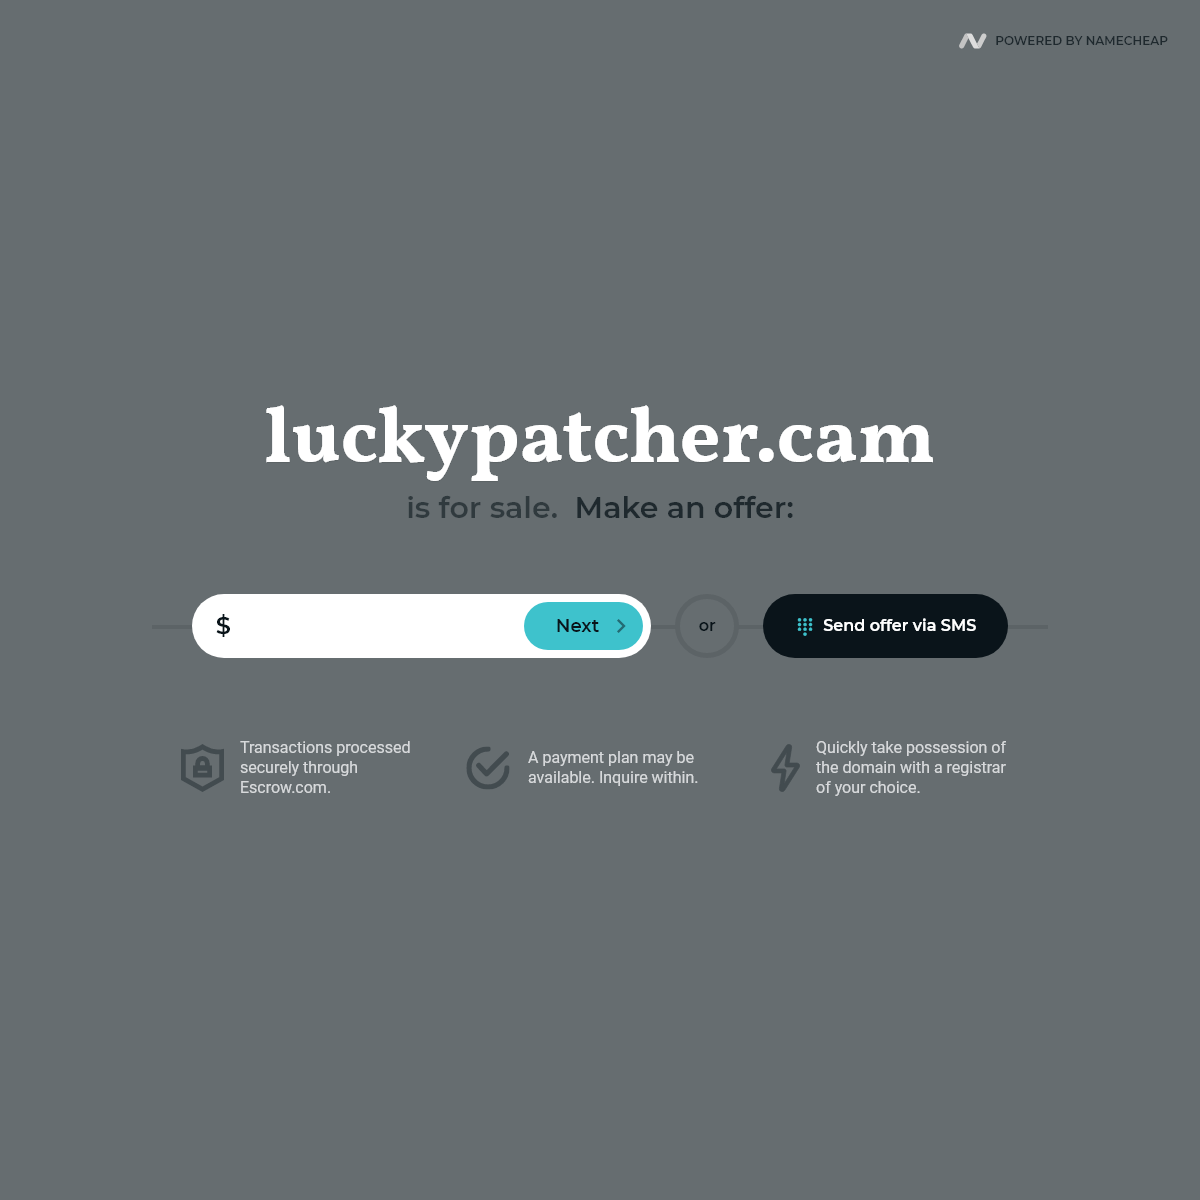 A complete backup of luckypatcher.cam